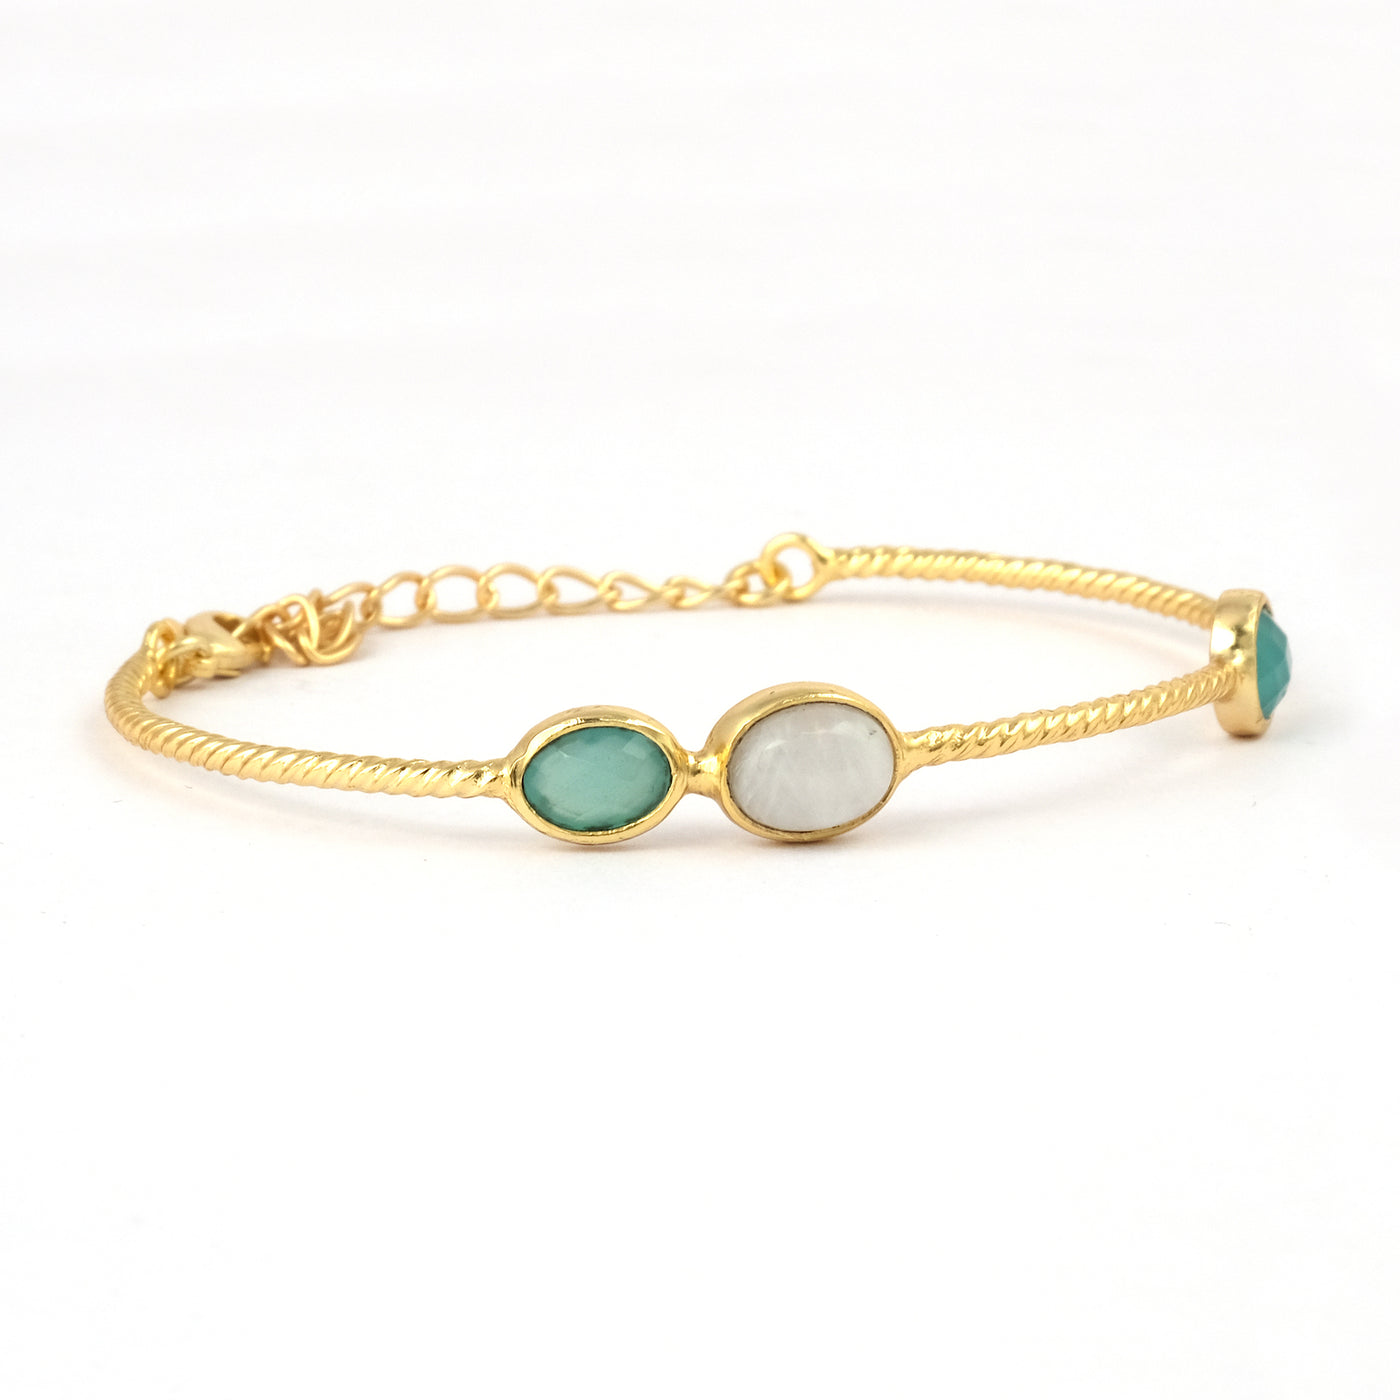 Gold Bangle Bracelet with Moonstone and Chalcedony Stones